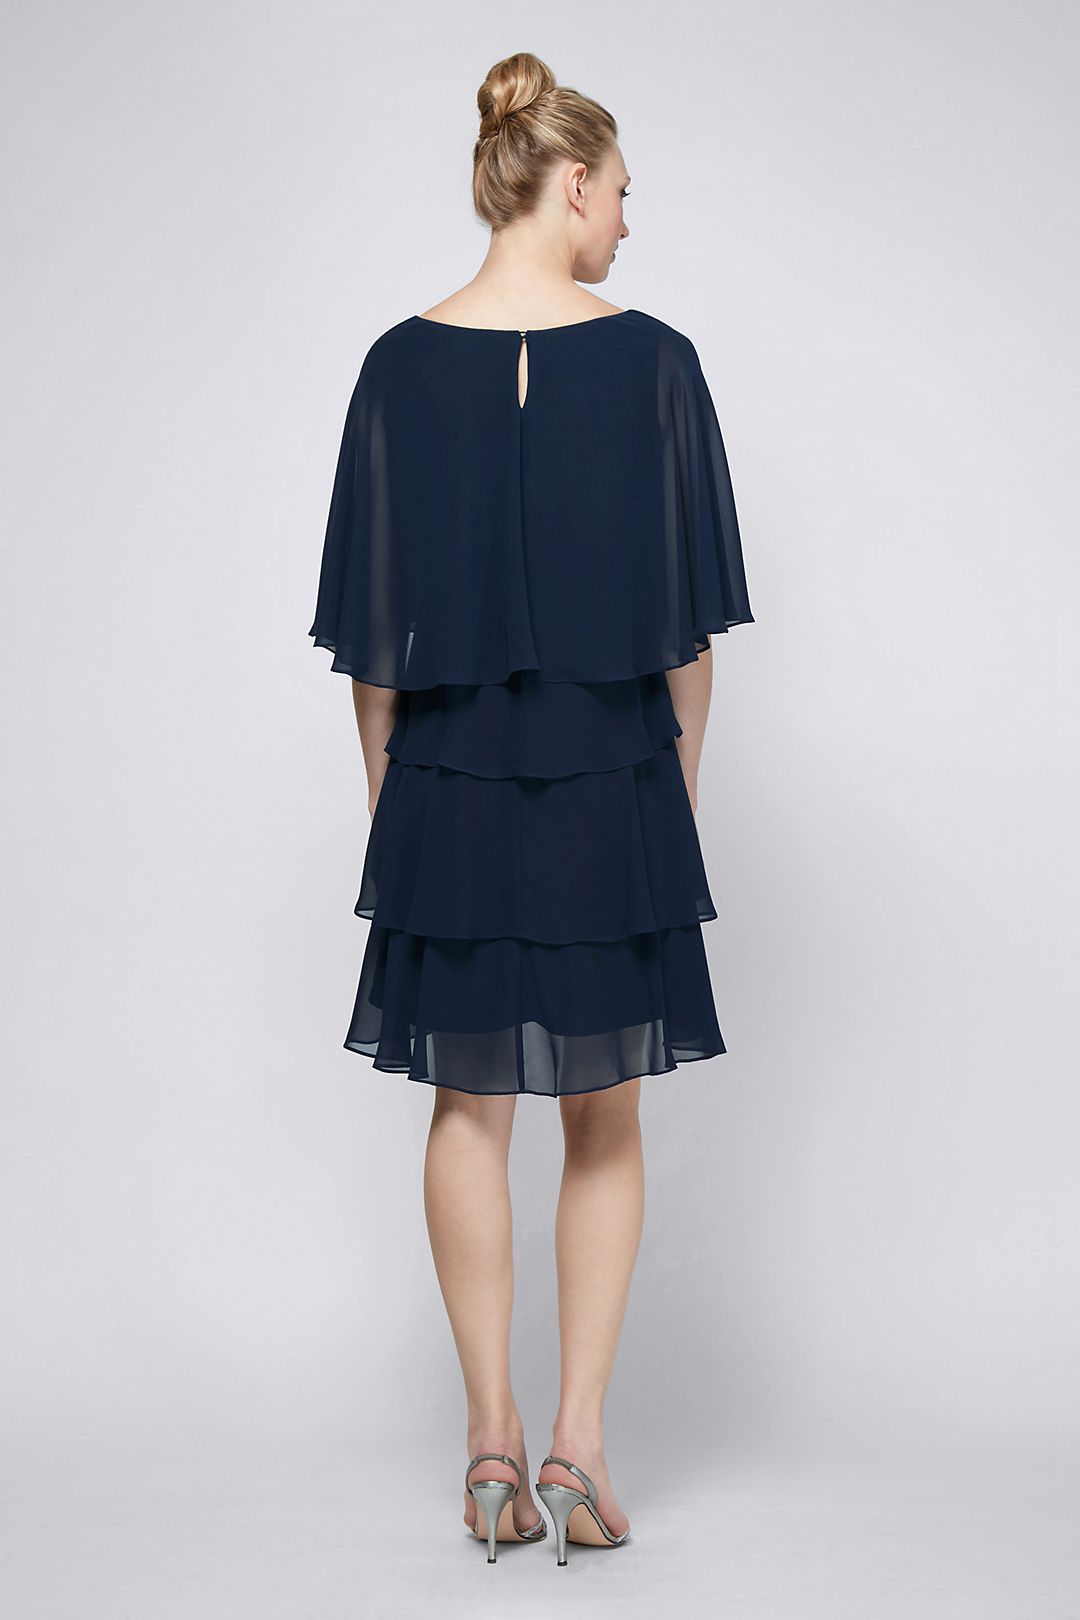 Tiered Chiffon Capelet Dress with Beaded Shoulders Image 2